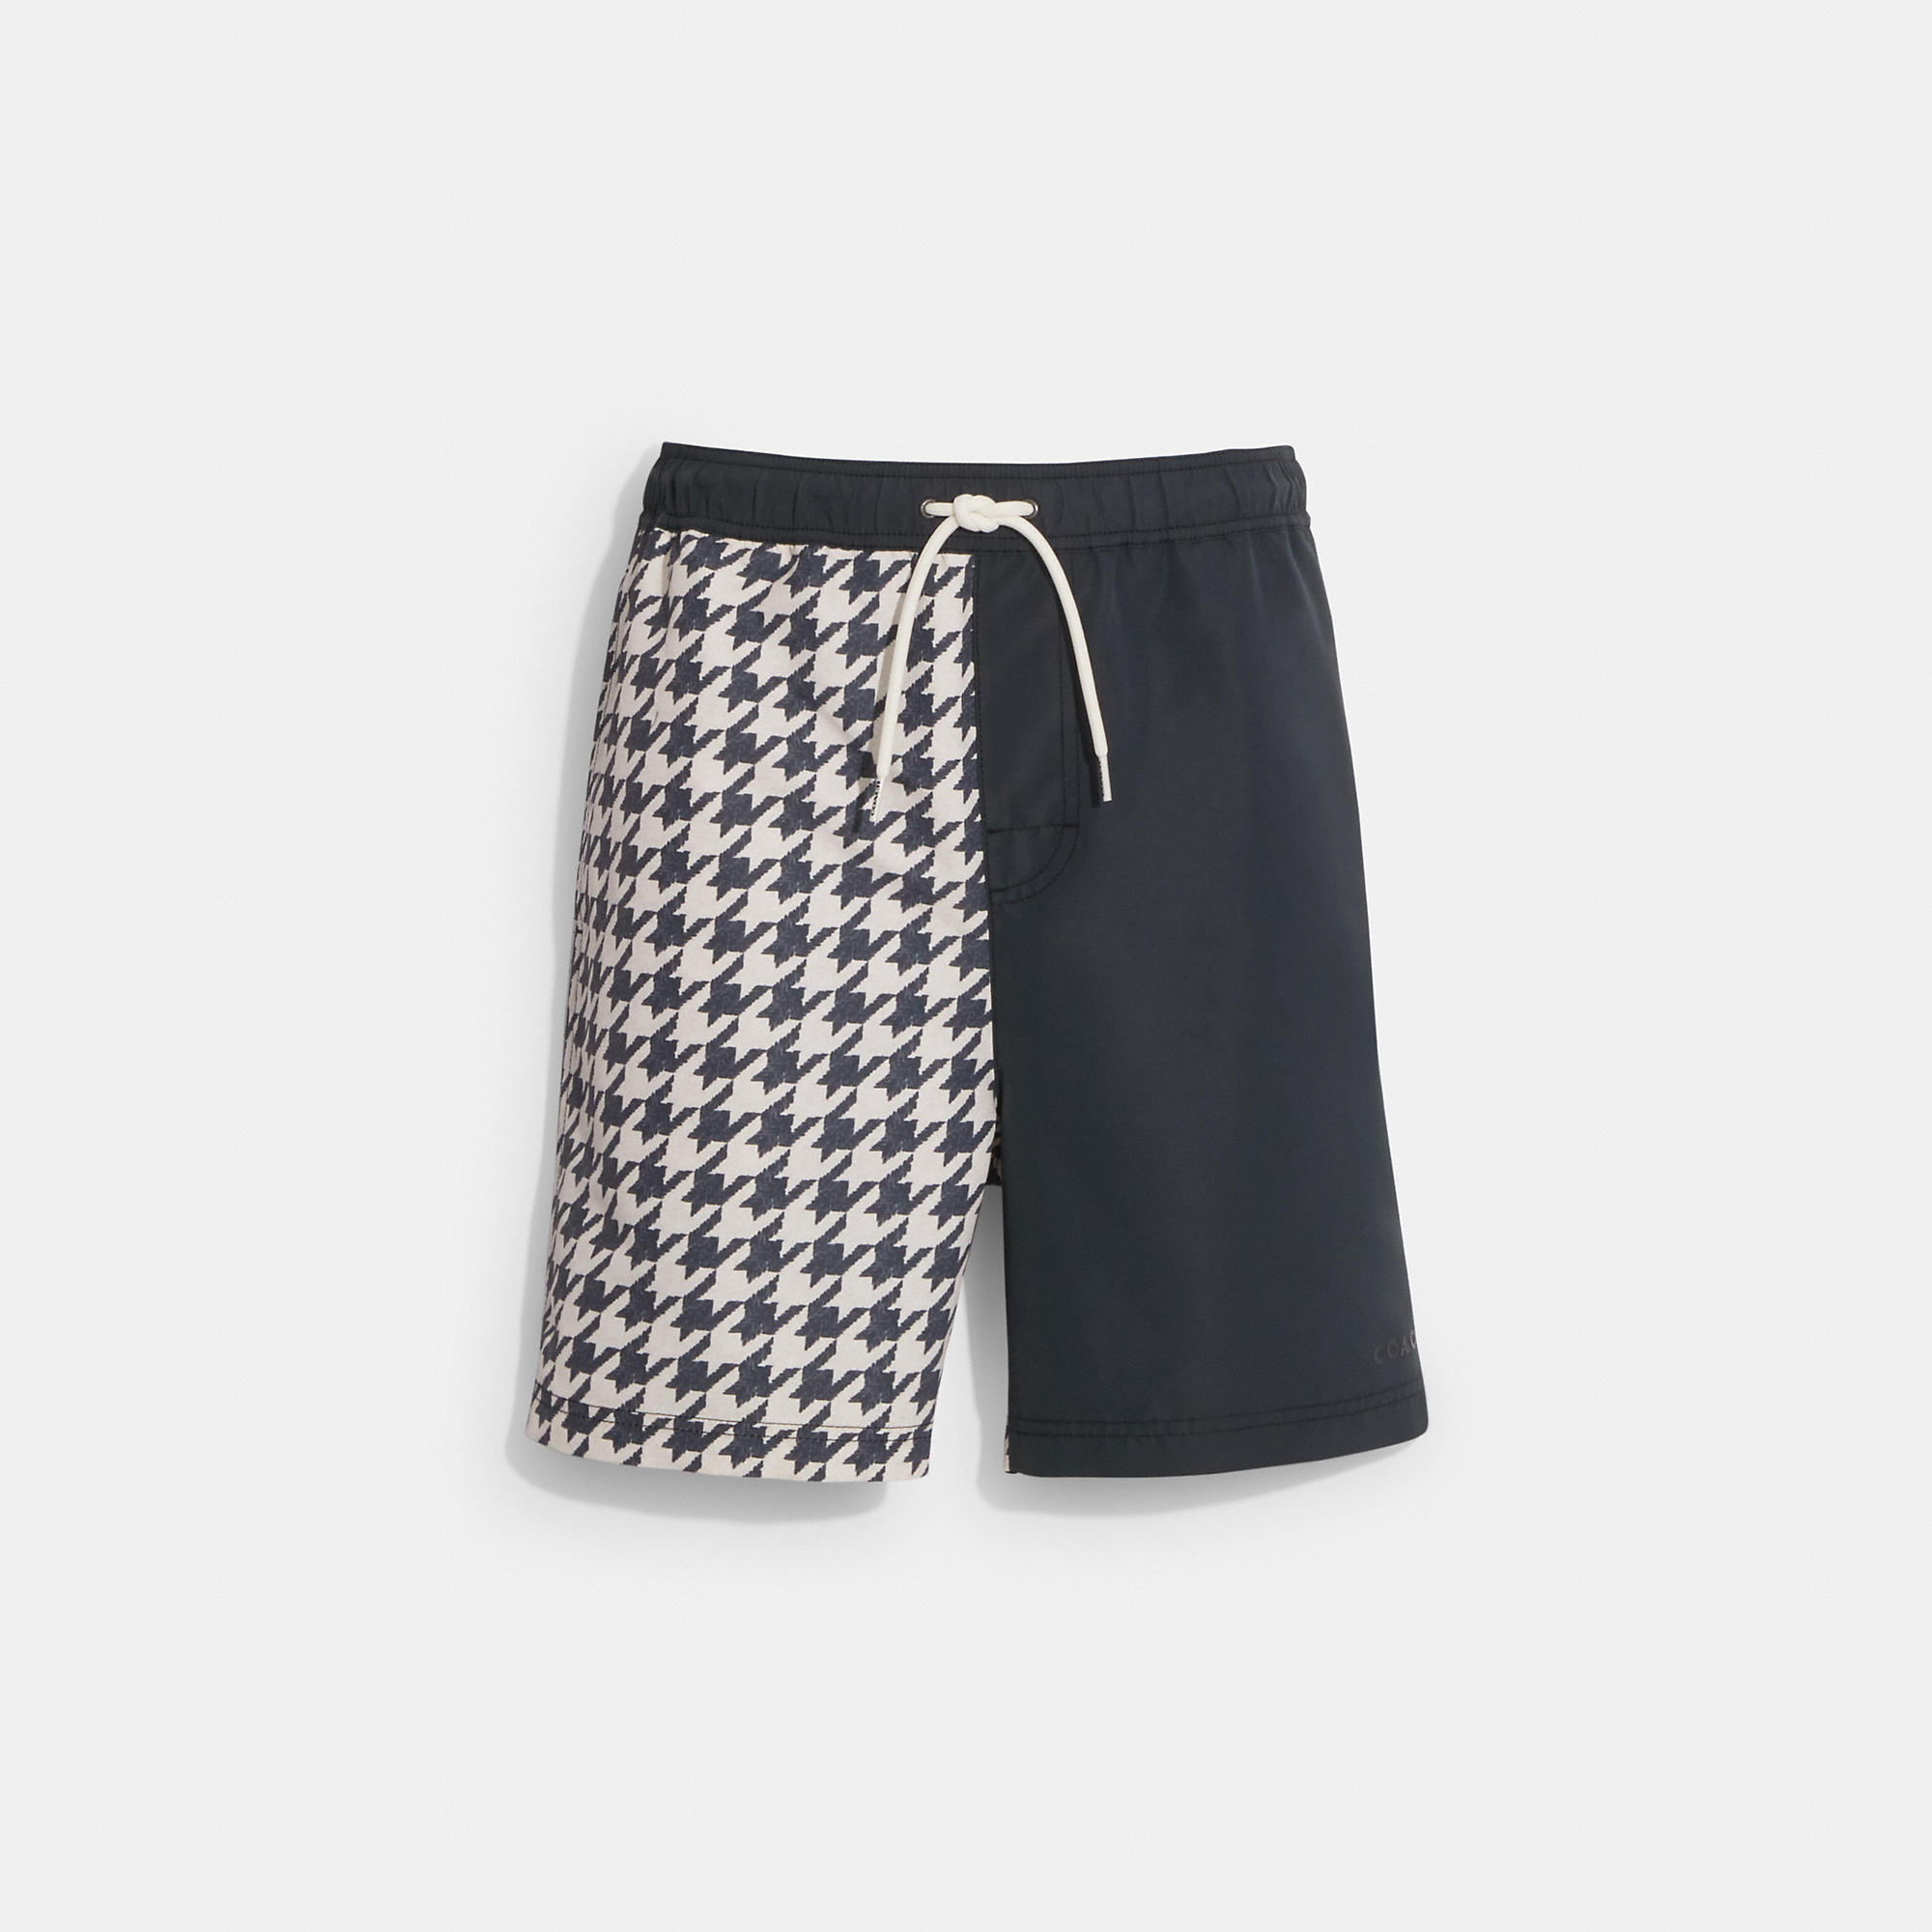 Coach Outlet Houndstooth Print Swim Trunks In Black